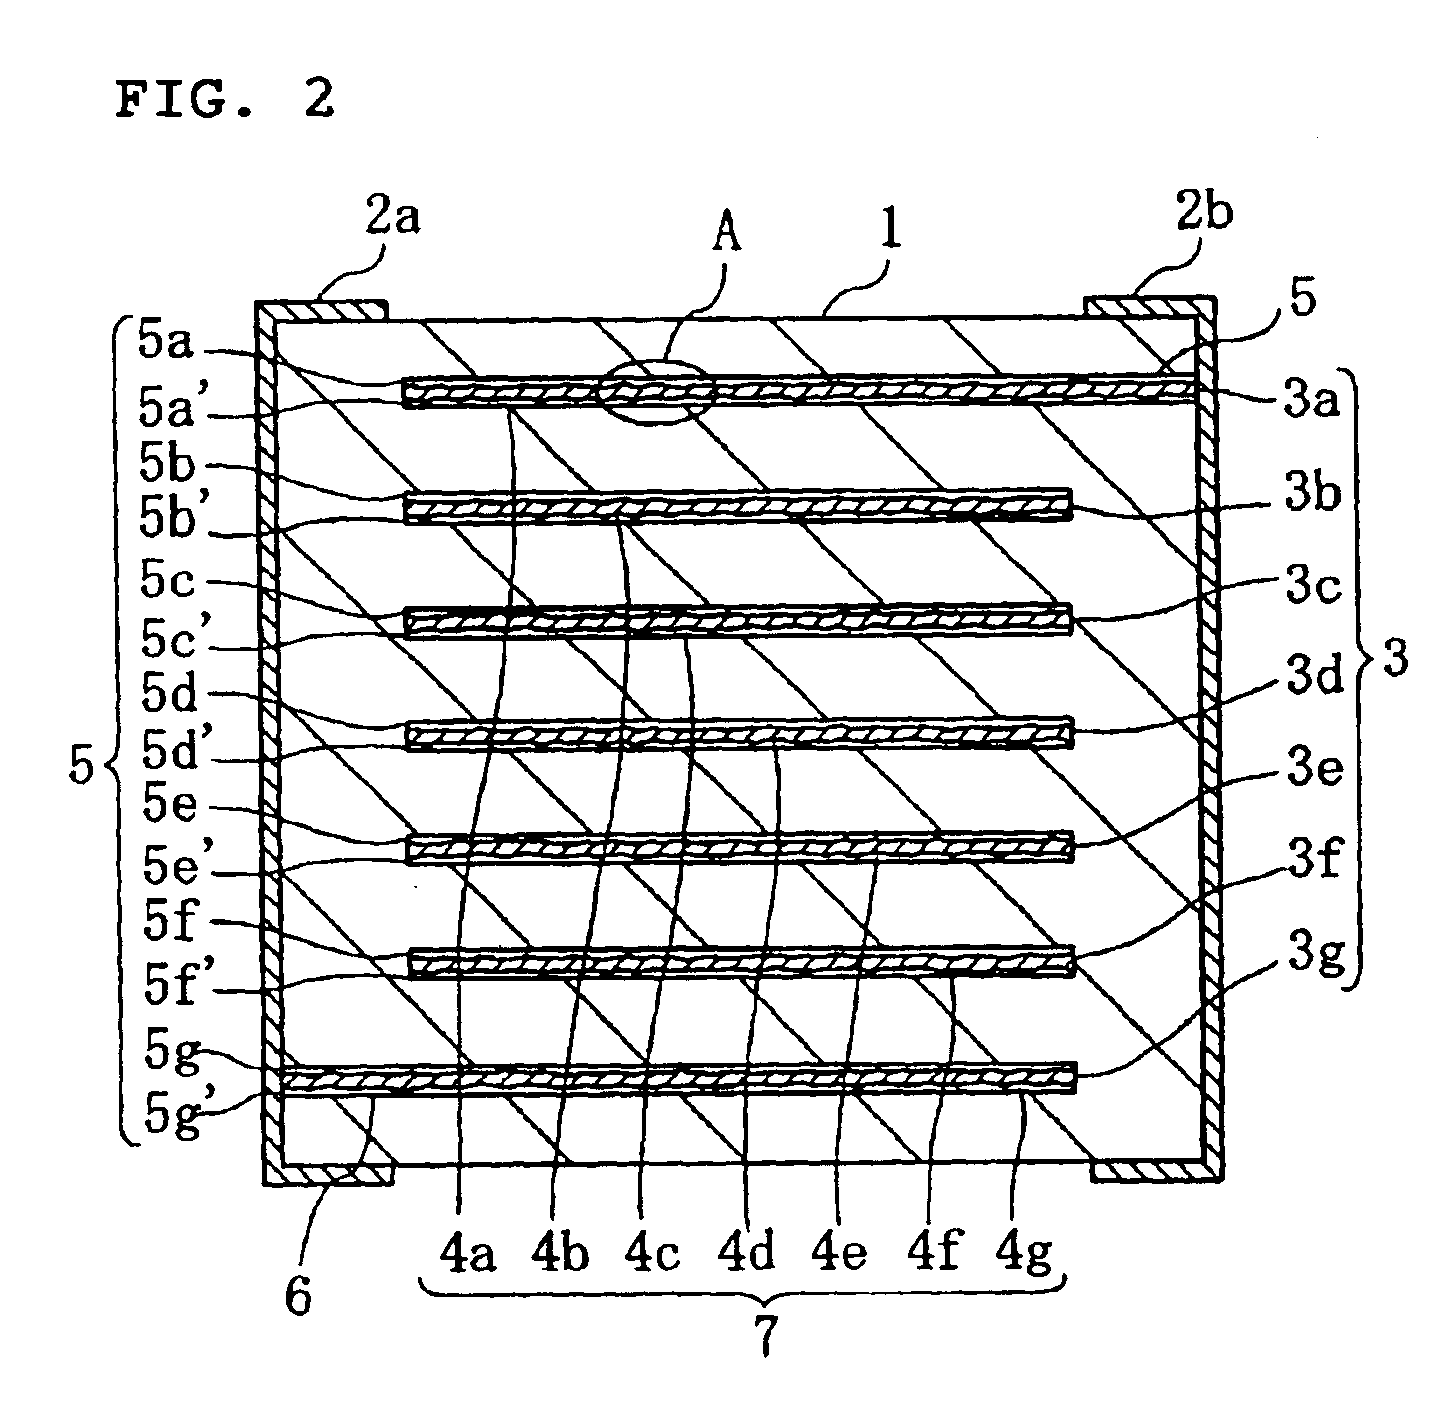 Method for manufacturing laminated multilayer electronic components